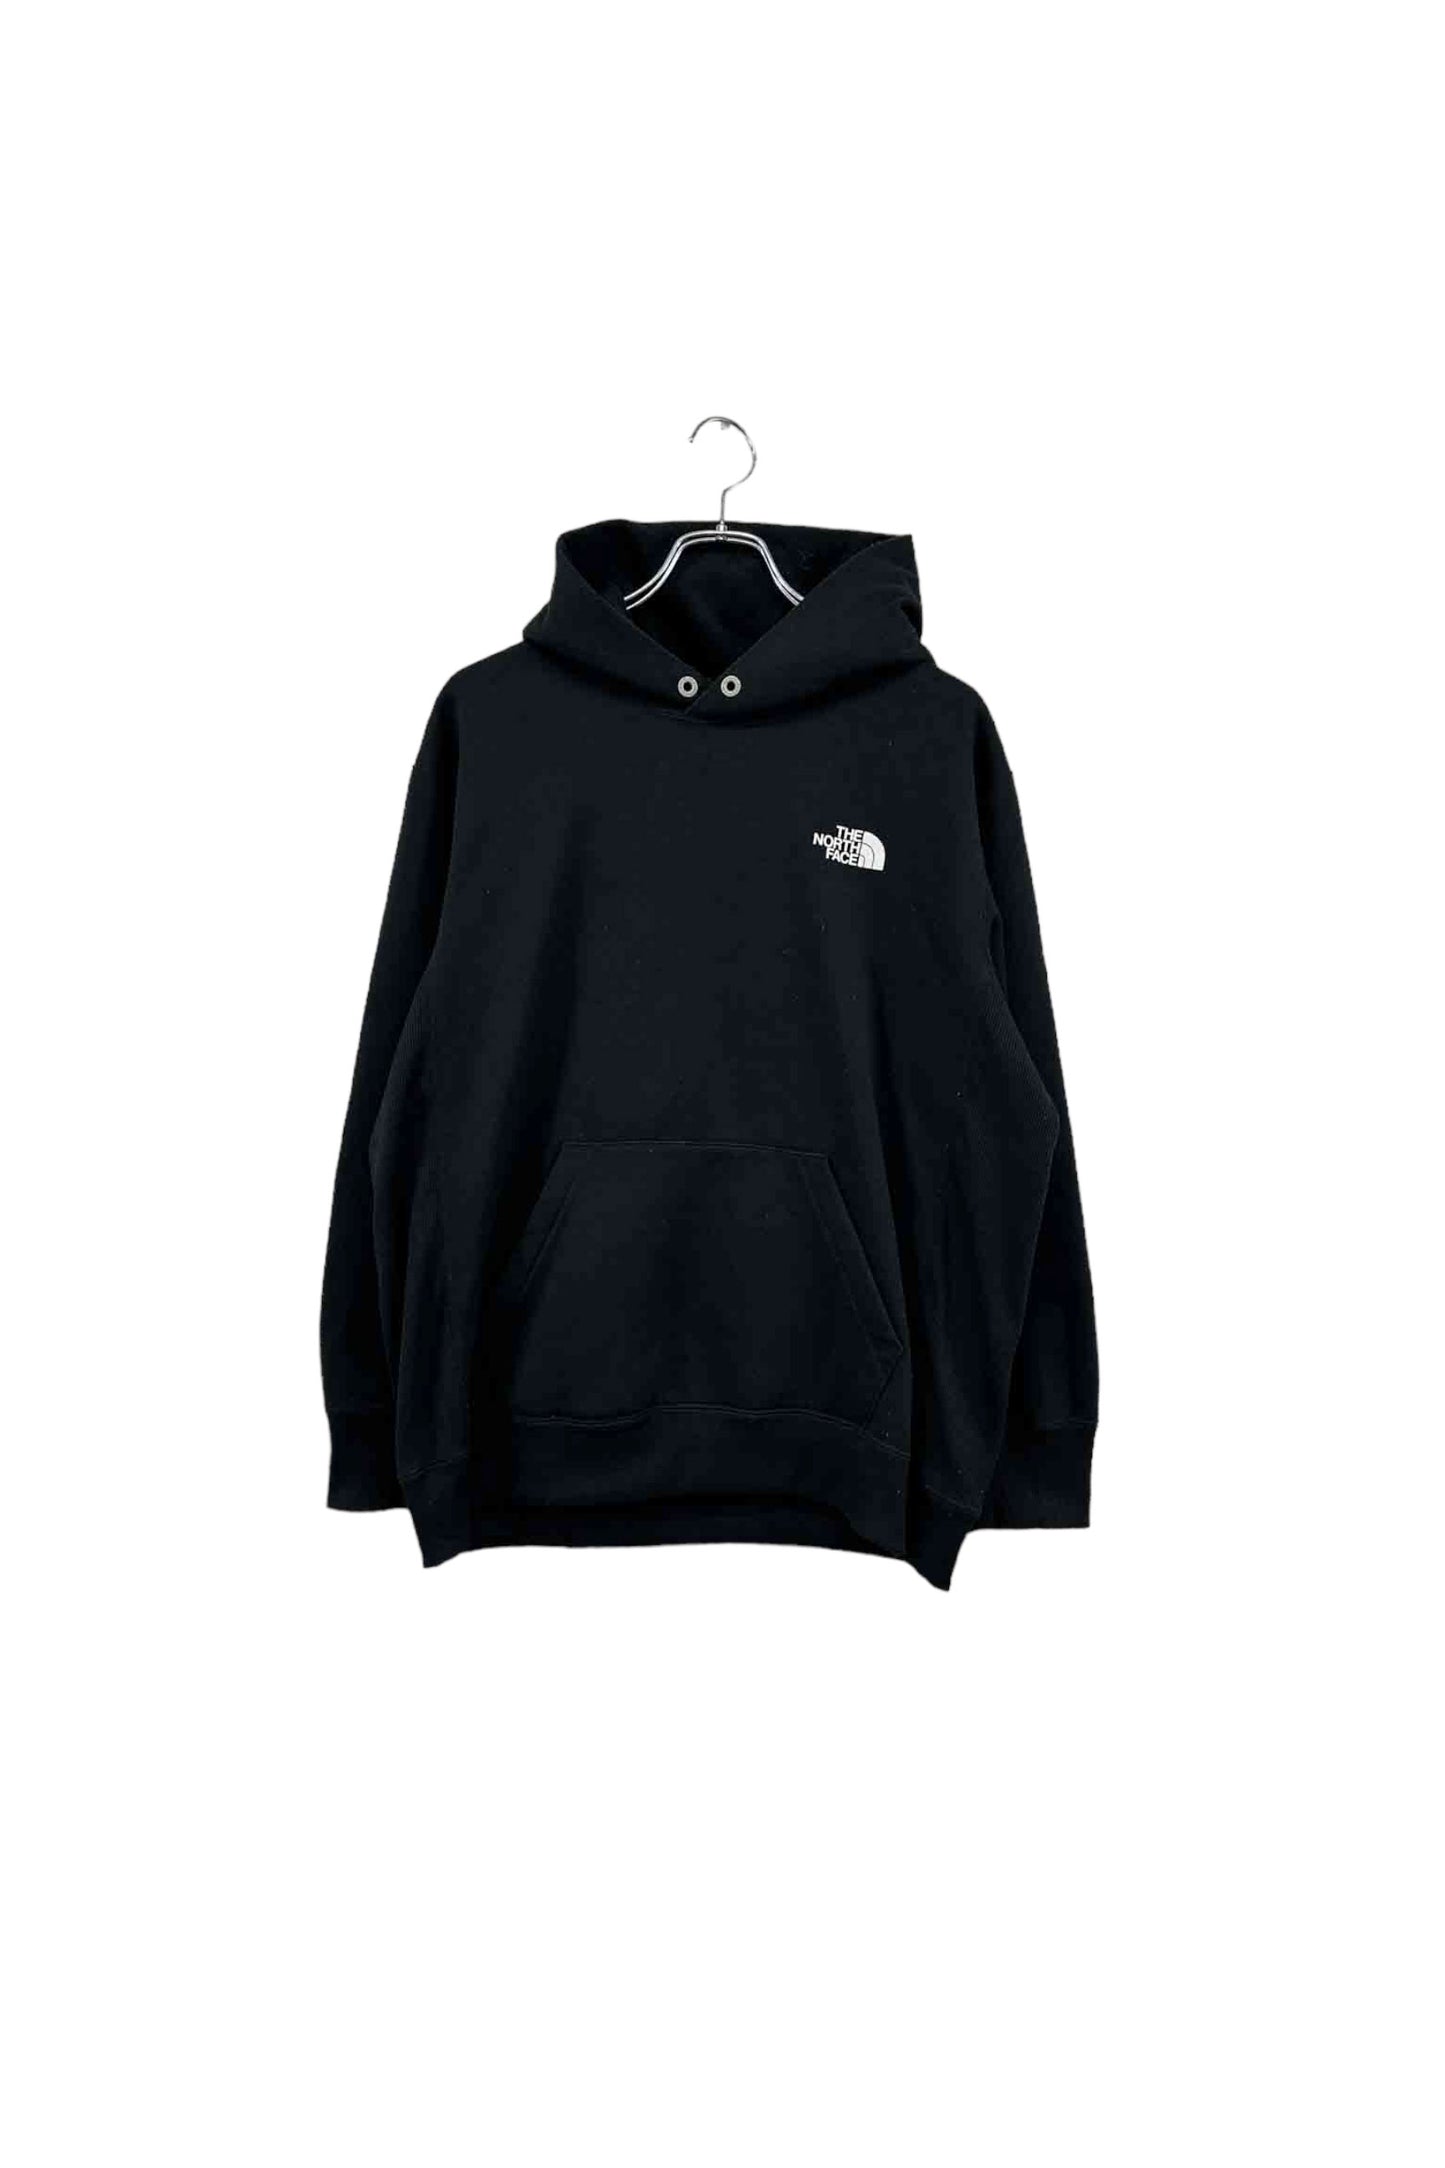 THE NORTH FACE hoodie